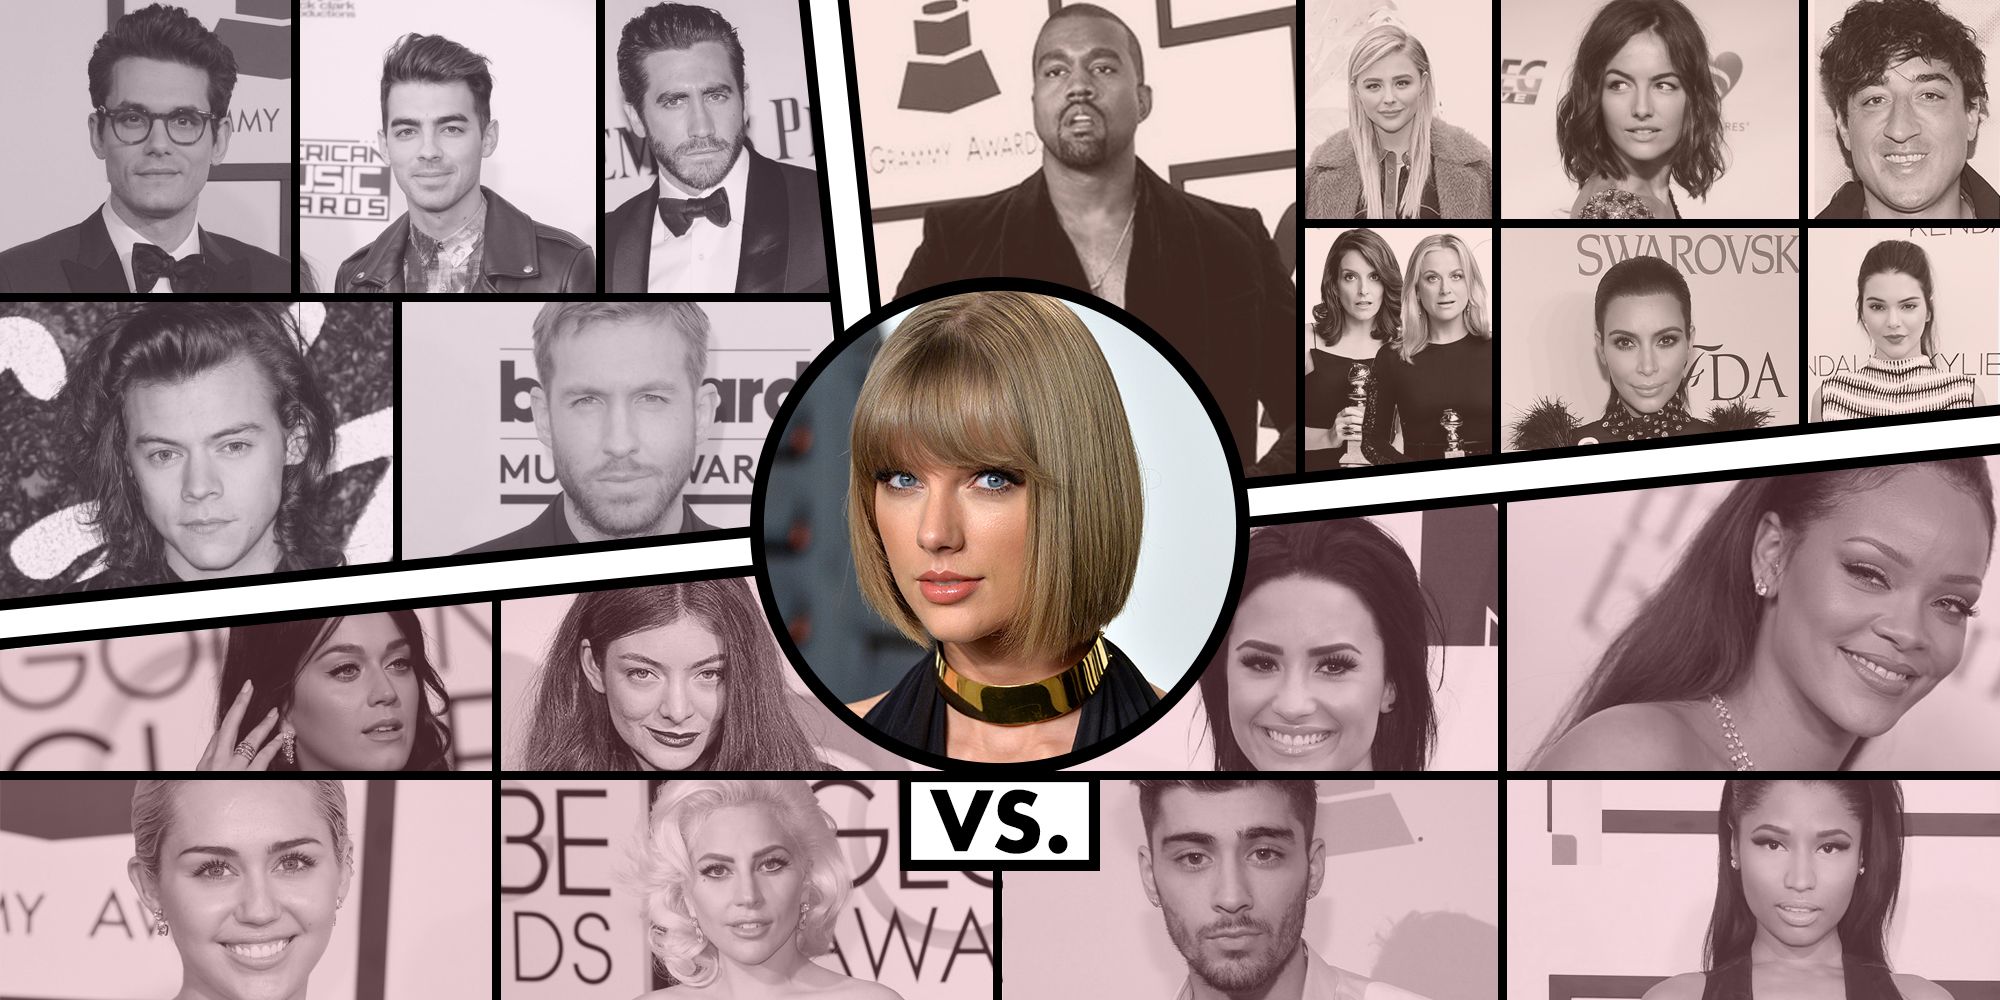 Meghan Trainer Shemale - Taylor Swift's Feuds - People Who Have Had Drama With Taylor Swift